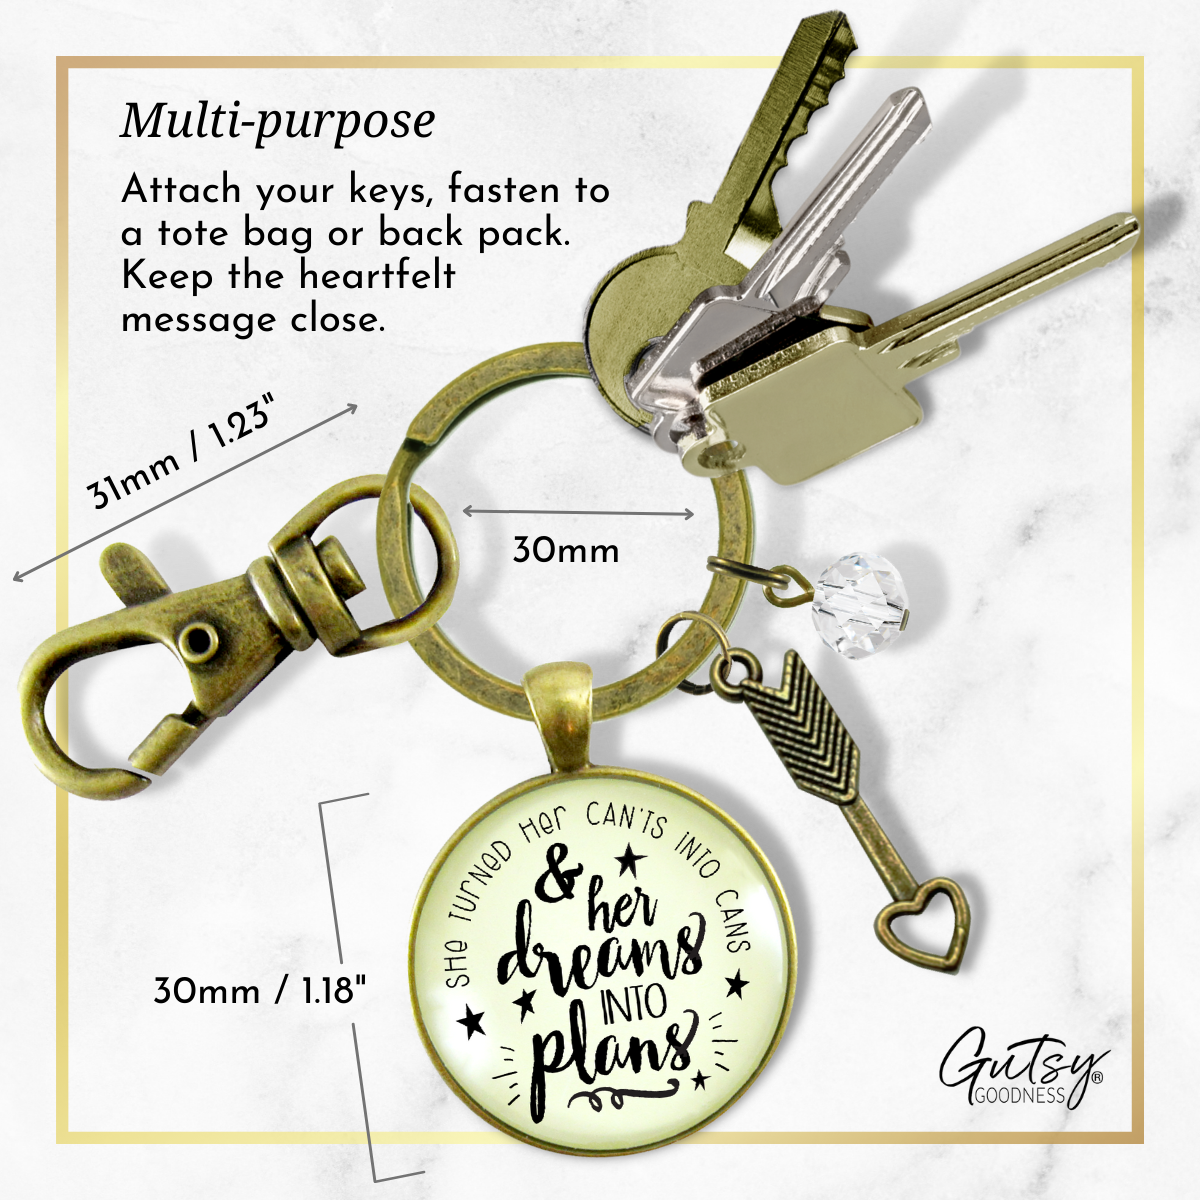 Dreams Into Plans Keychain Positive Life Words Boss Lady Jewelry - Gutsy Goodness Handmade Jewelry;Dreams Into Plans Keychain Positive Life Words Boss Lady Jewelry - Gutsy Goodness Handmade Jewelry Gifts